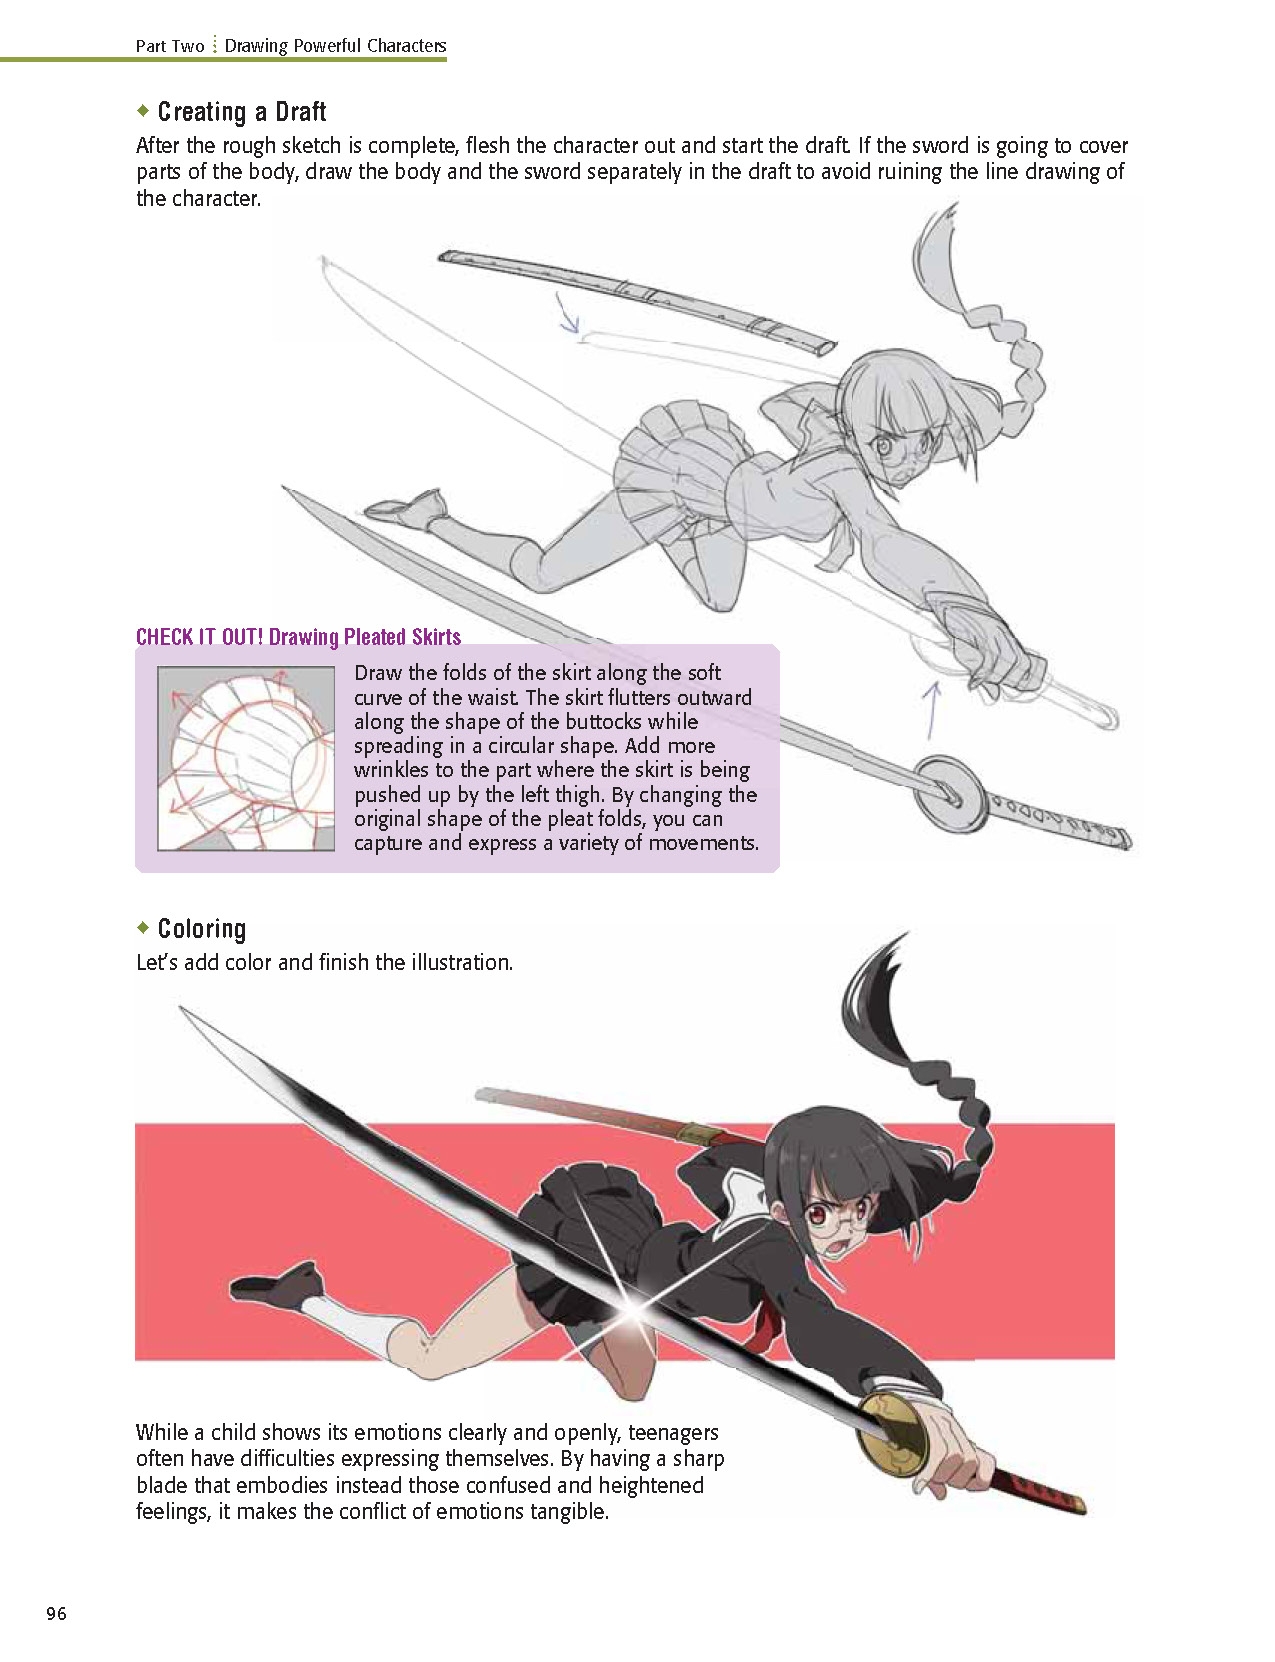 The Complete Guide to Drawing Dynamic Manga Sword Fighters: (An Action-Packed Guide with Over 600 illustrations) 97